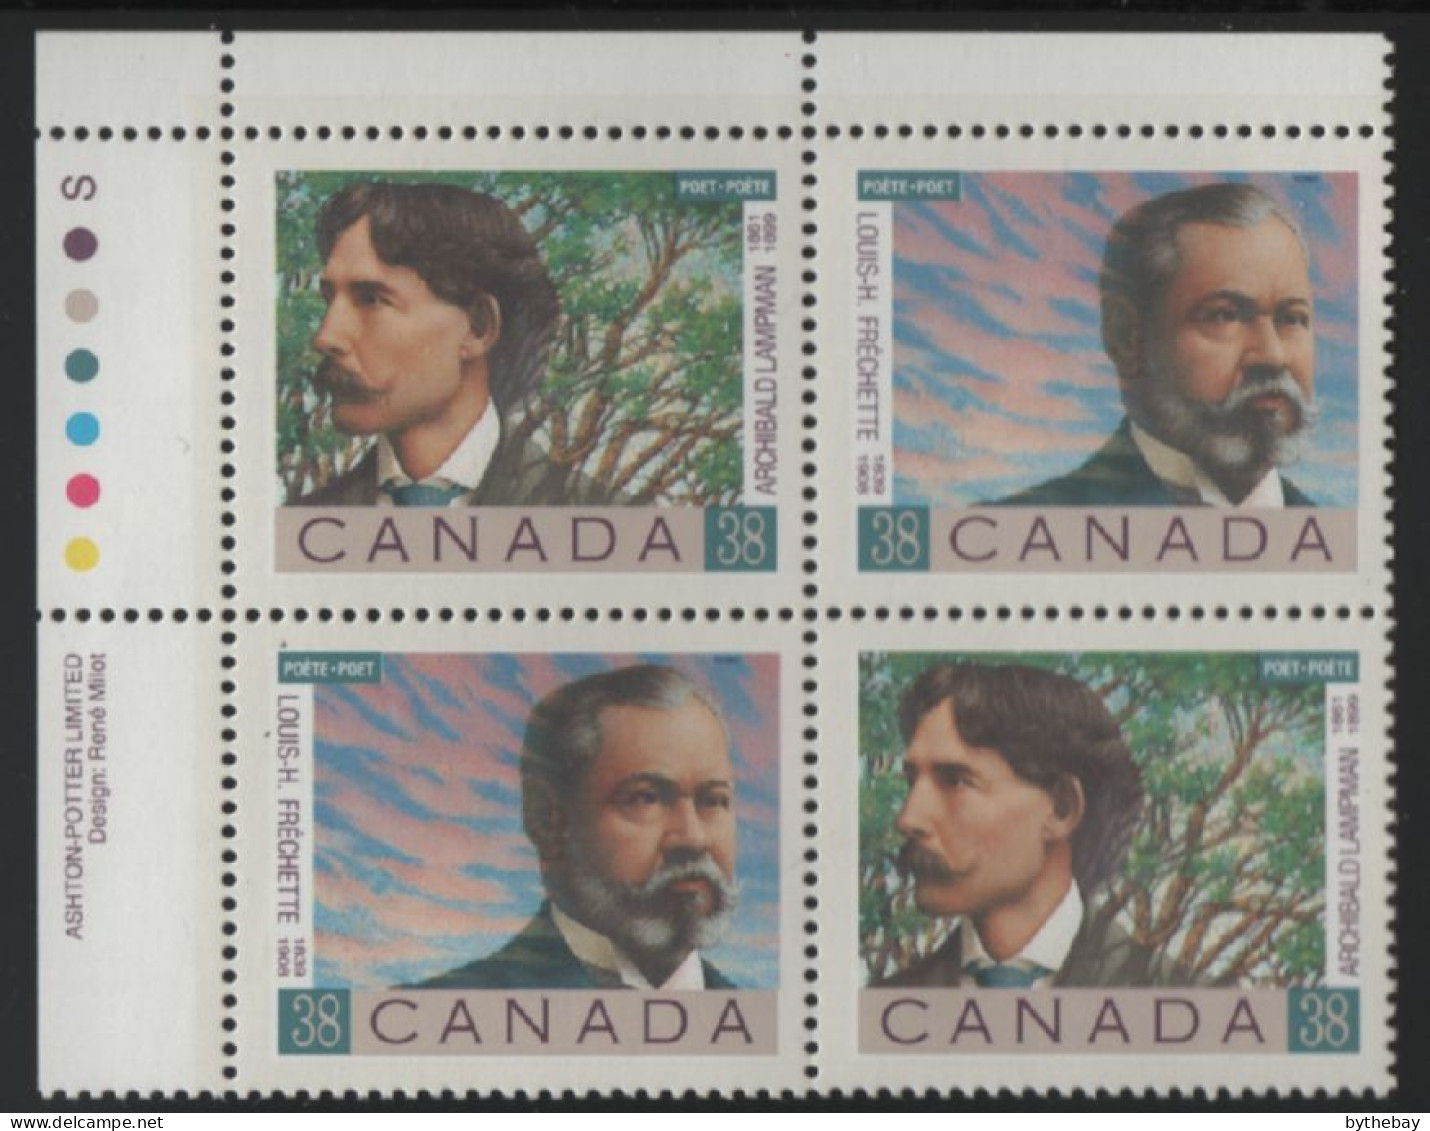 Canada 1989 MNH Sc 1244a 38c Poets UL Plate Block - Plate Number & Inscriptions